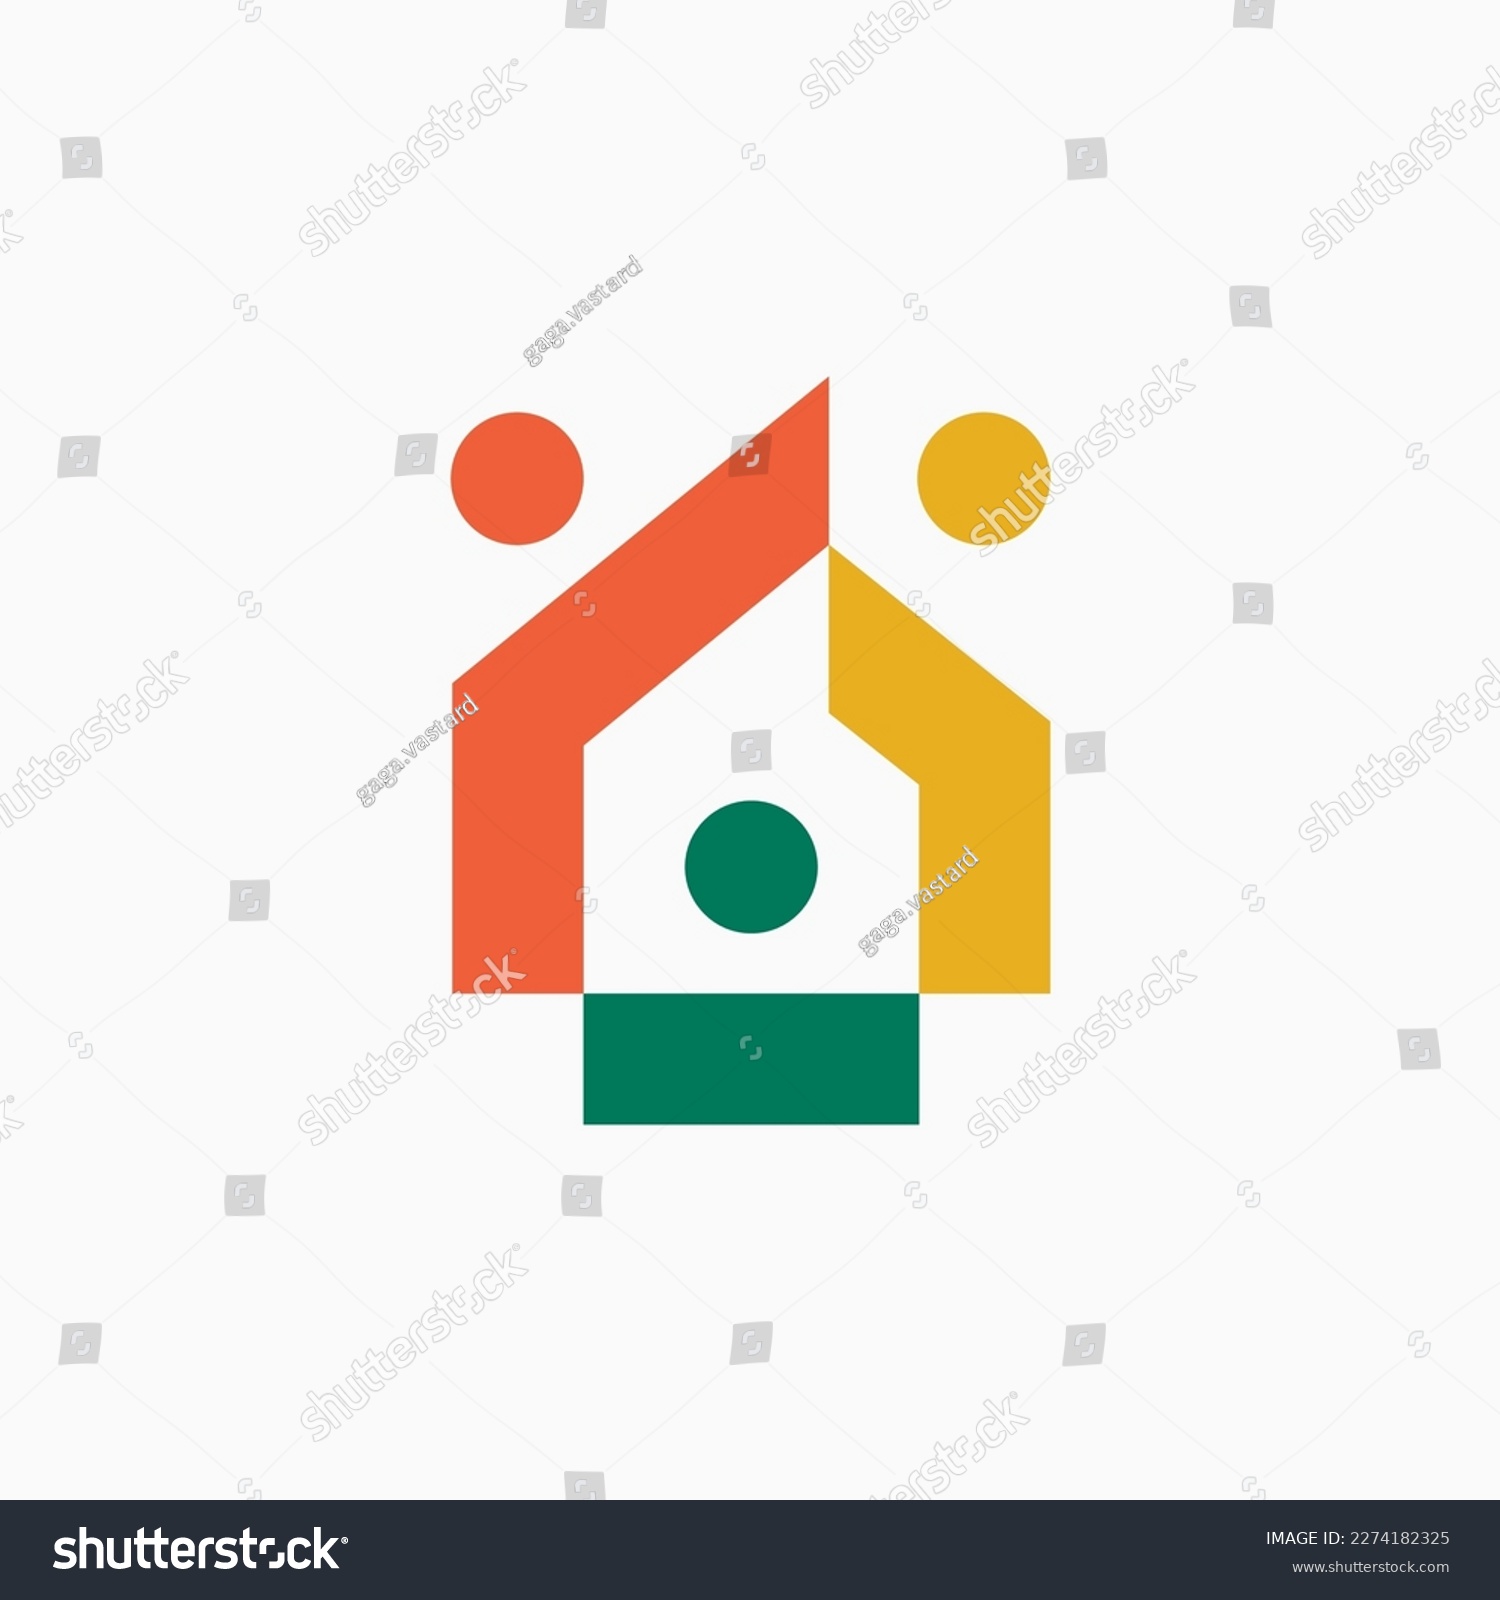 SVG of house home people human team work family logo vector icon illustration svg